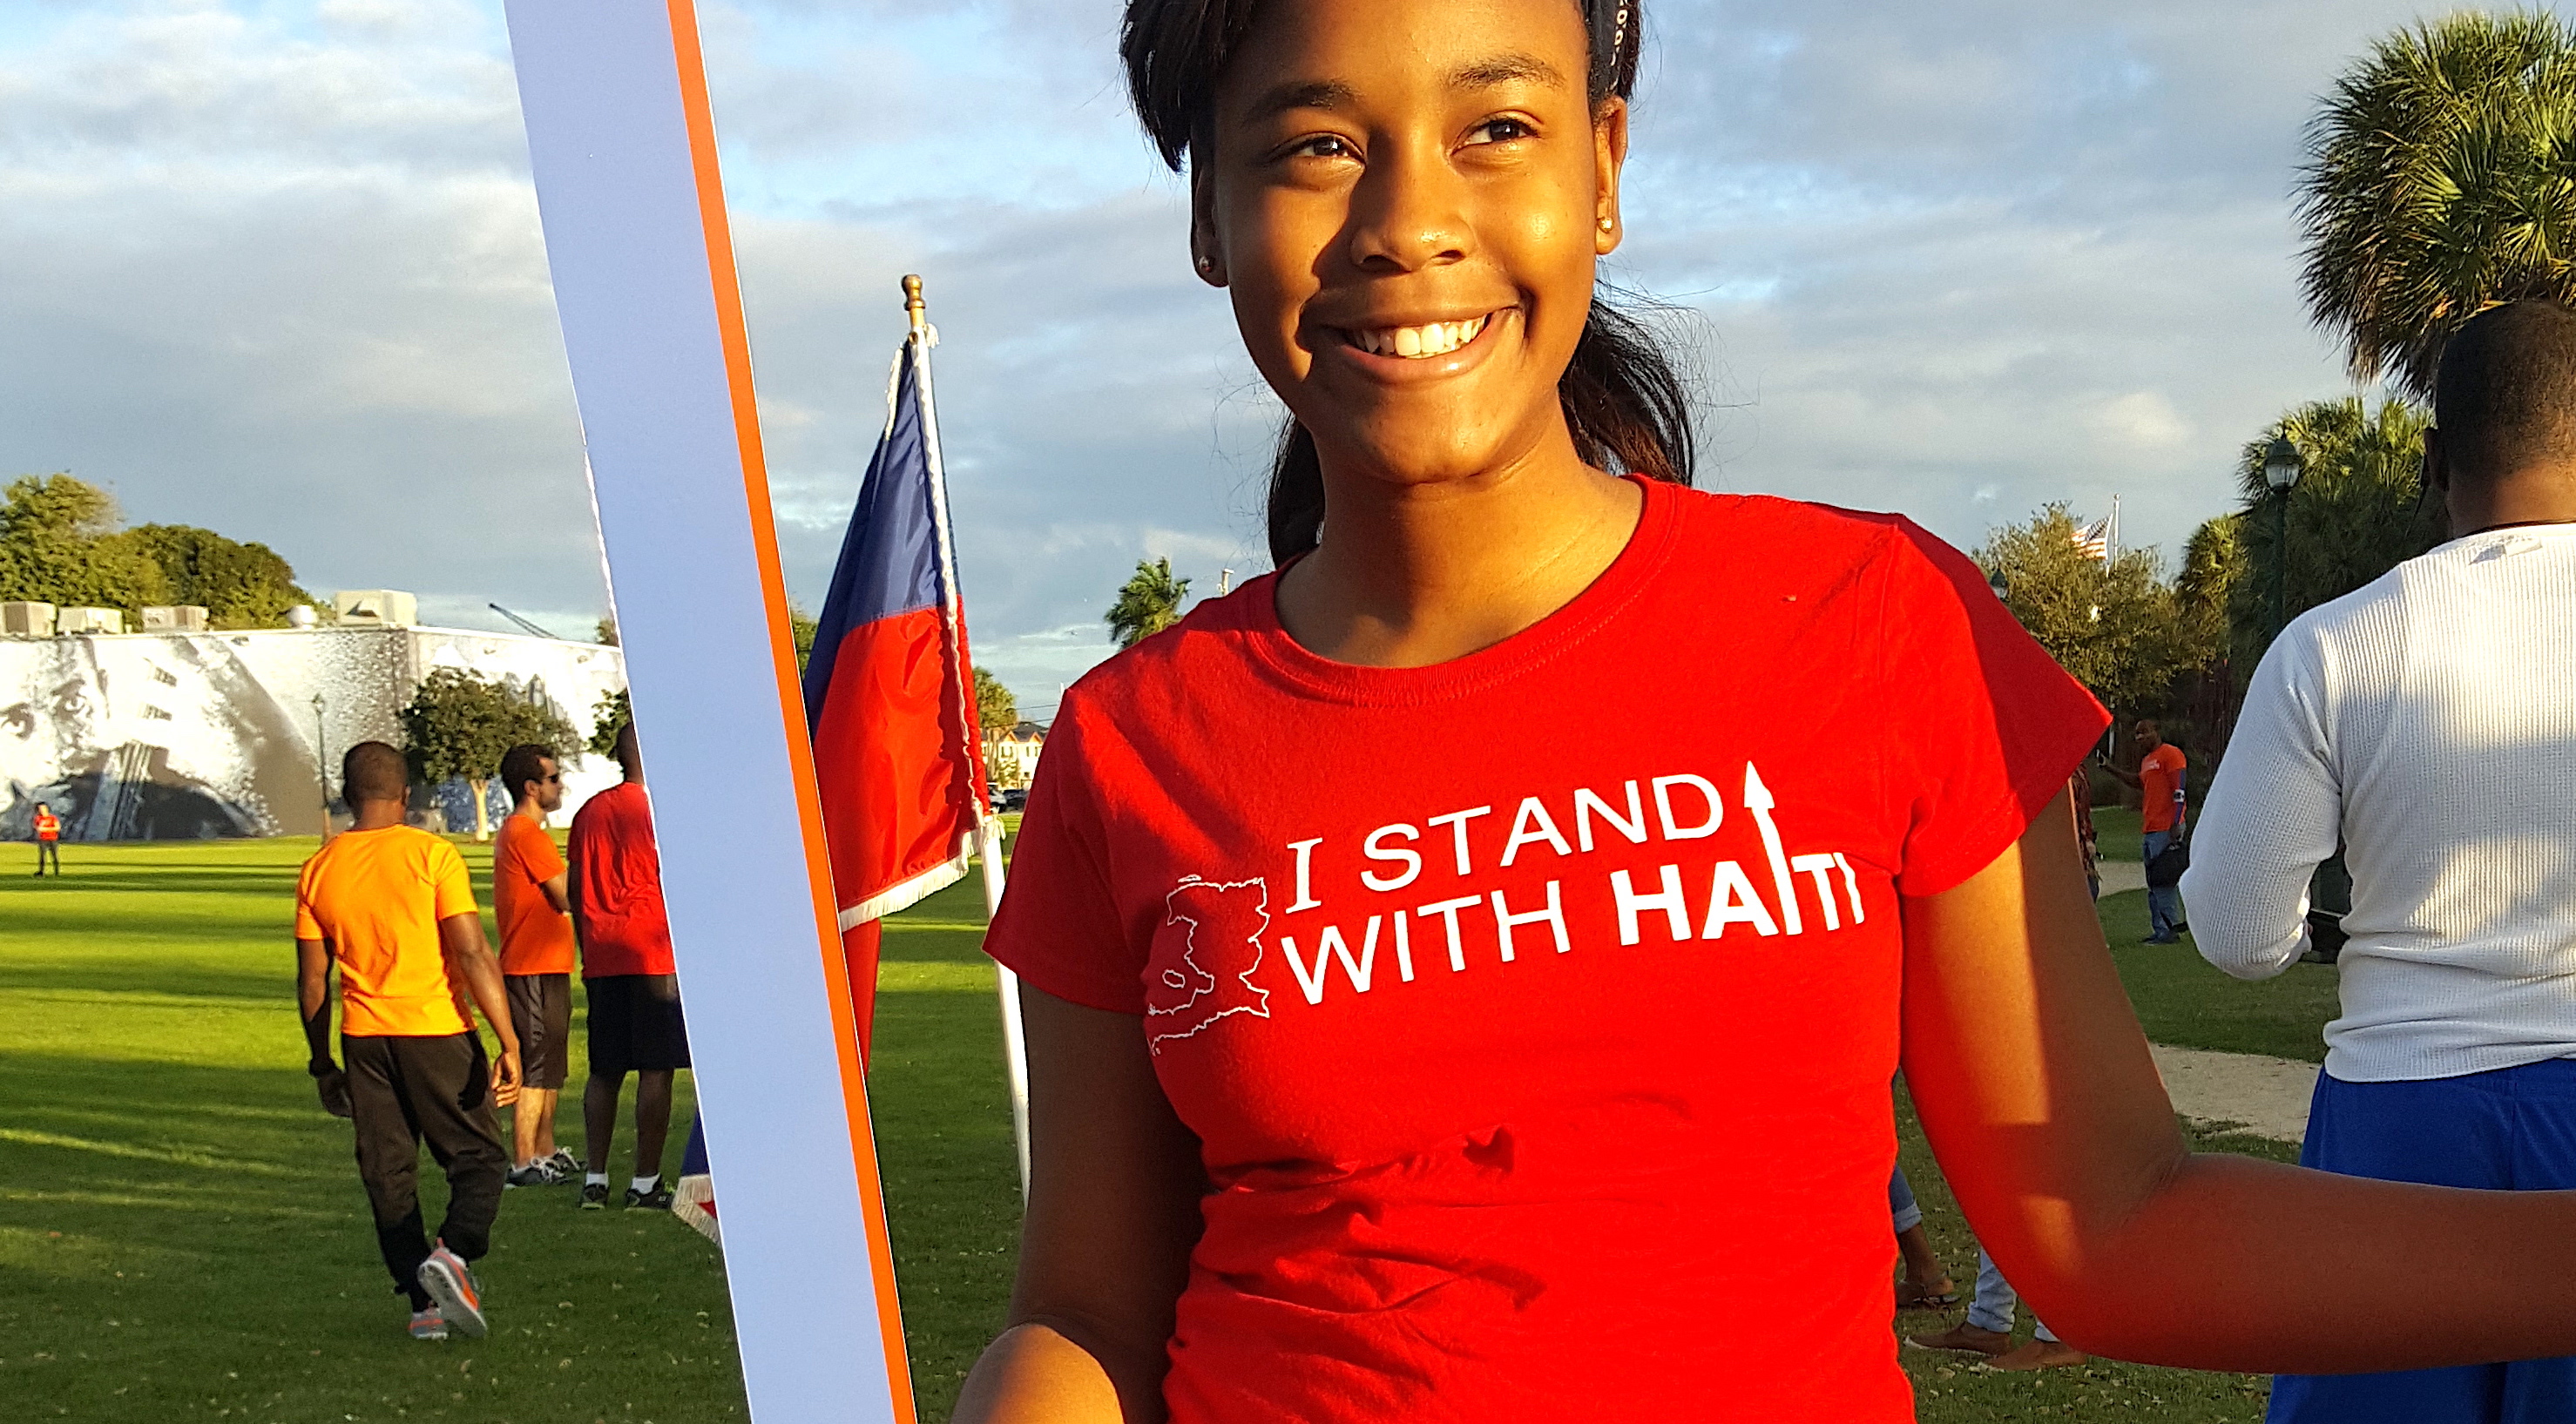 Stand with Haiti 2017 campaign